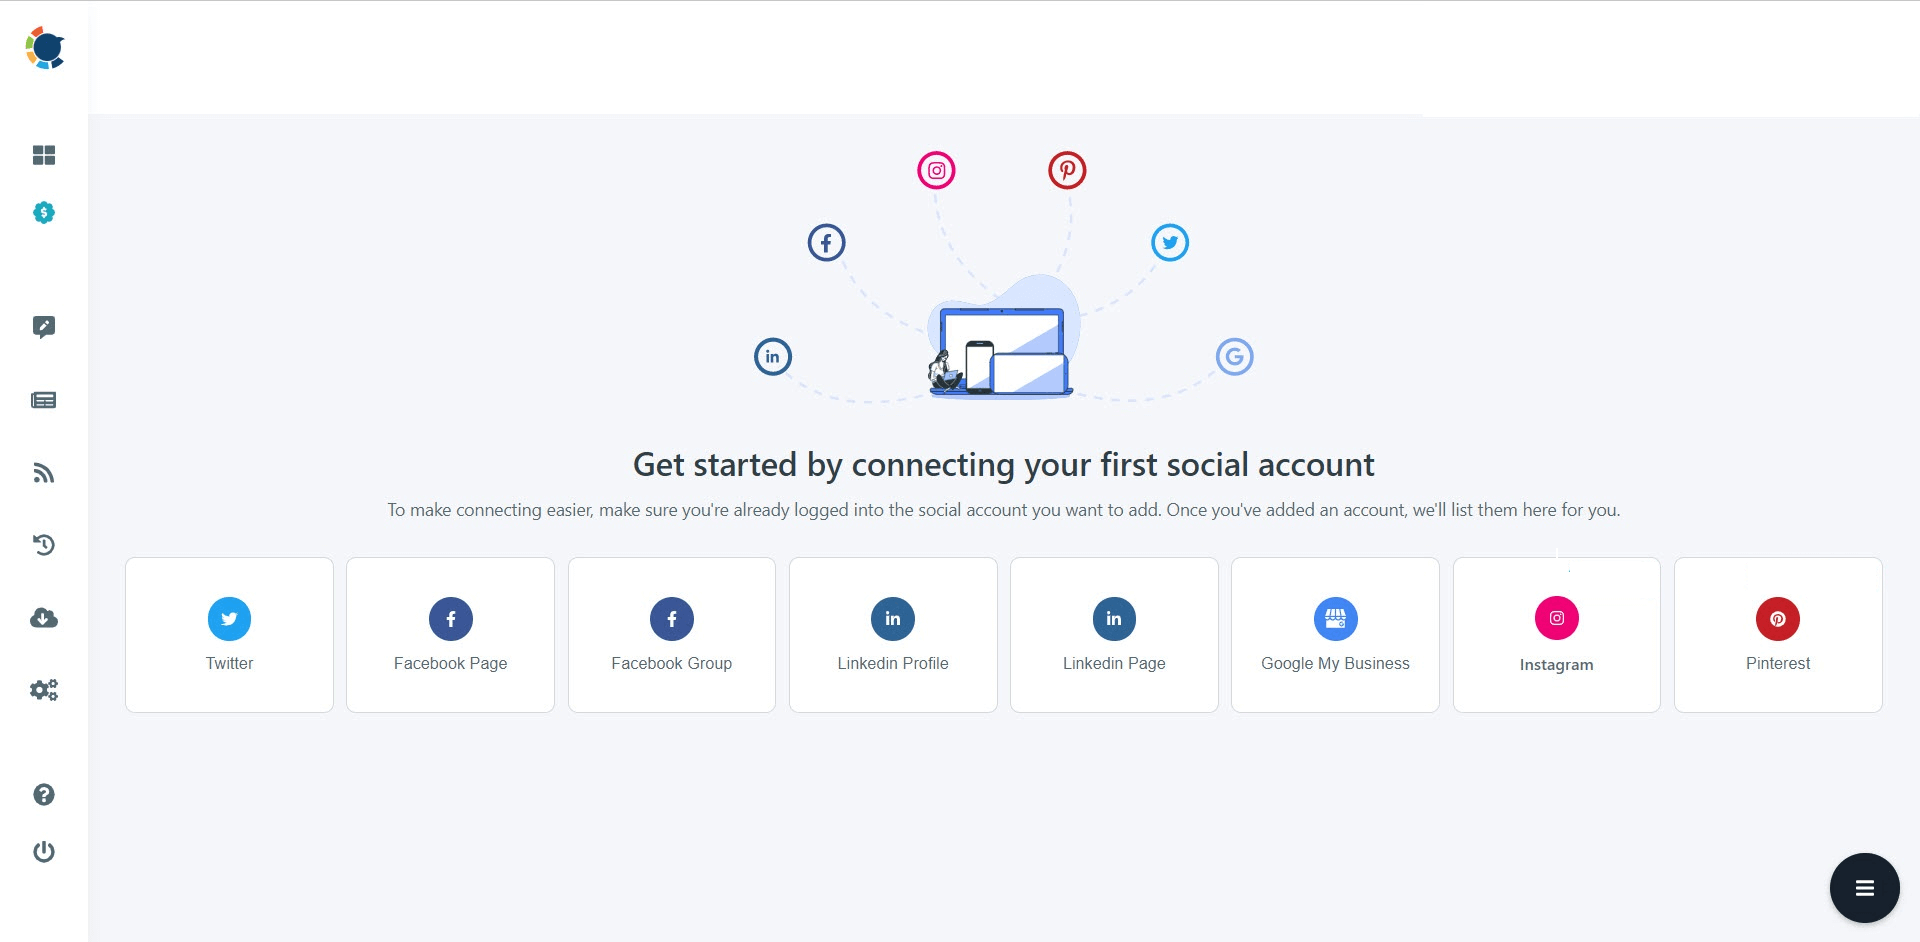 Circleboom Publish supports Twitter, Instagram, Facebook, LinkedIn, and Google Business Profile on the same dashboard.